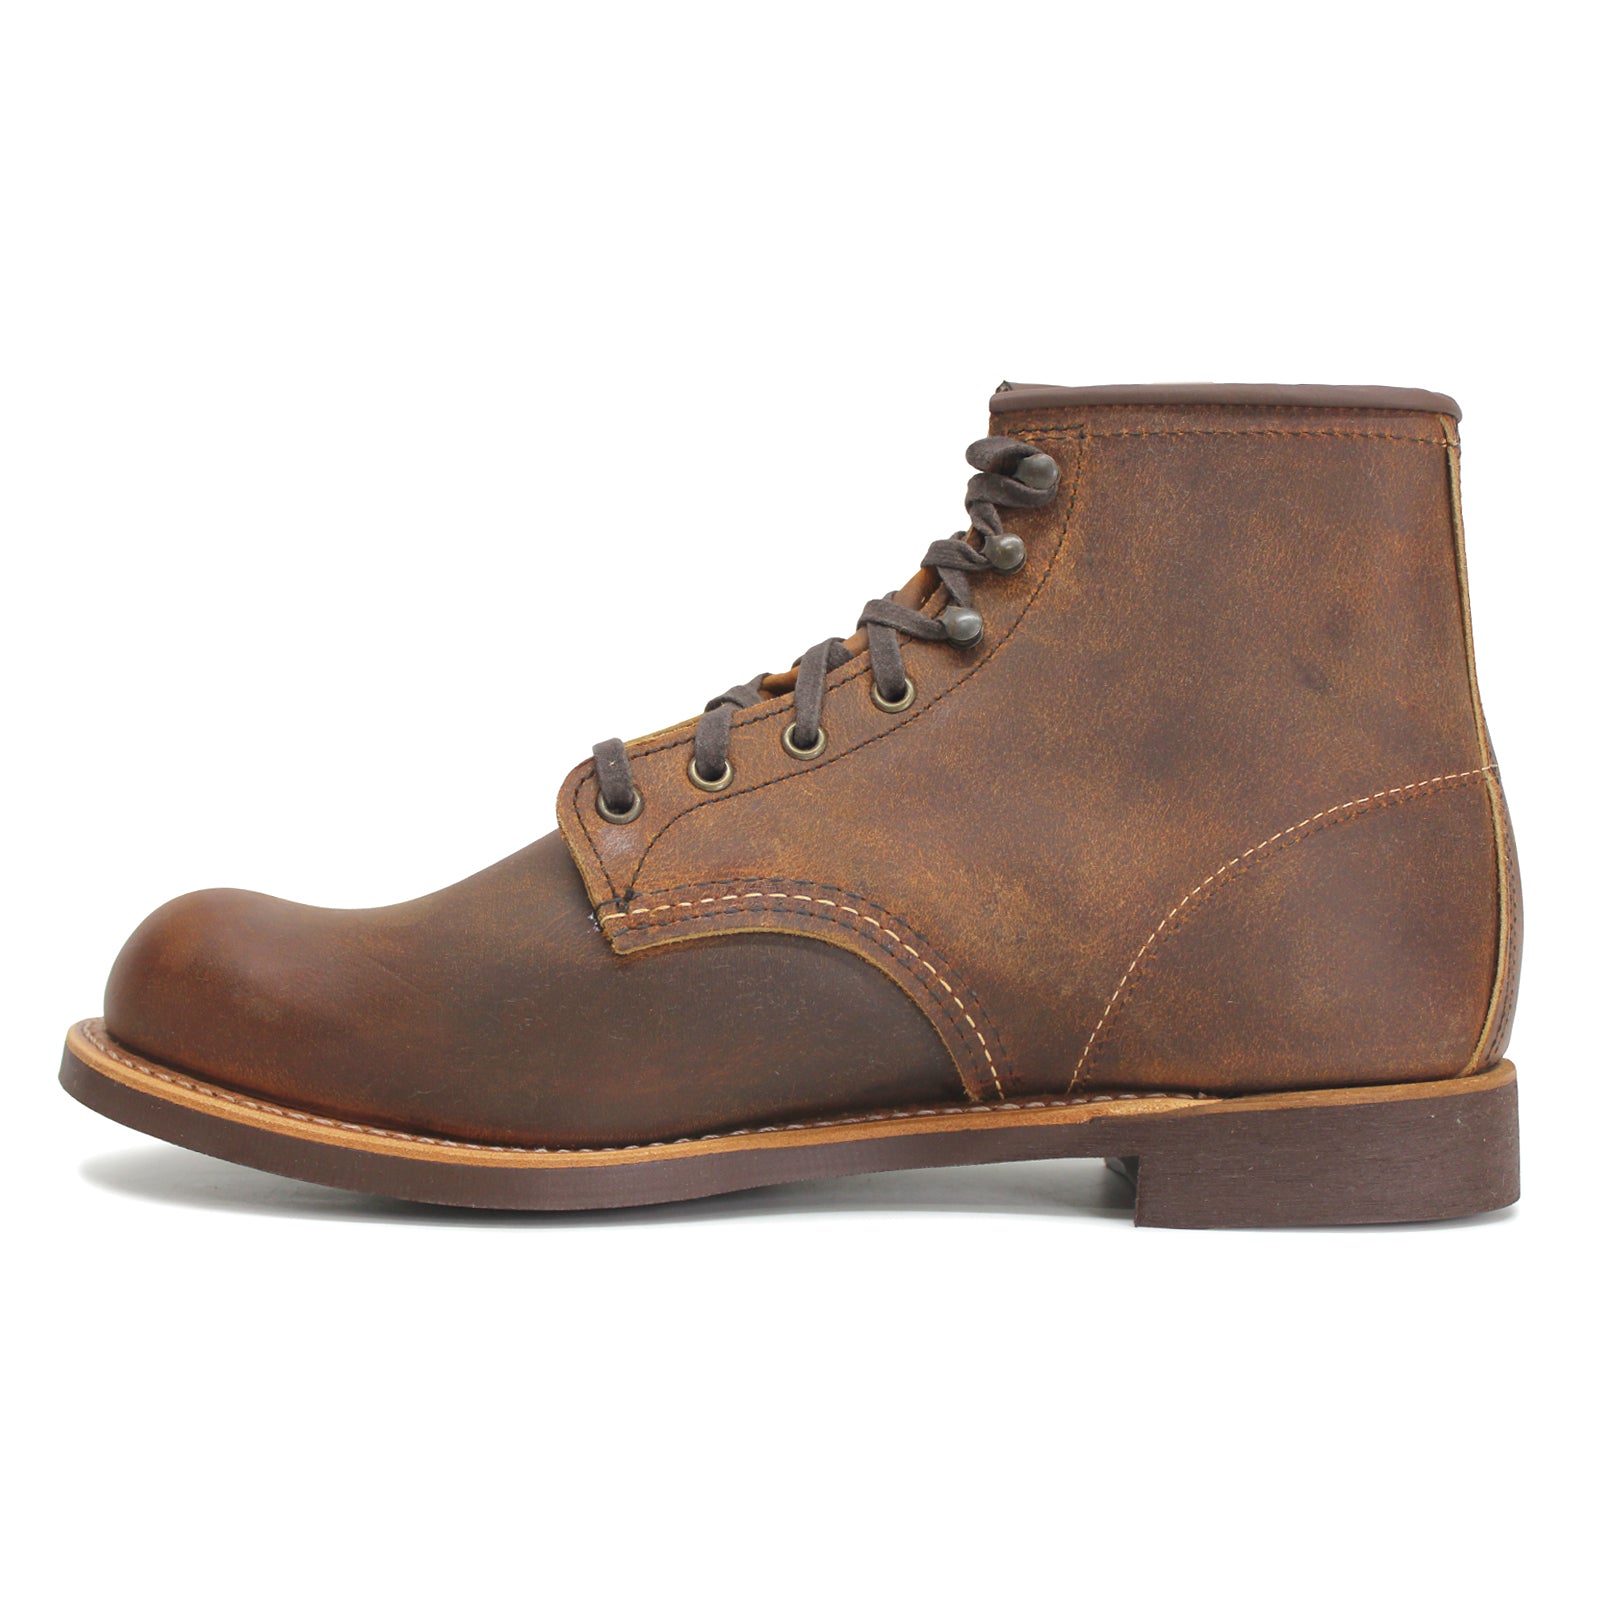 Red Wing 3343 Blacksmith Nubuck Leather 6 Inch Men's Ankle Boots